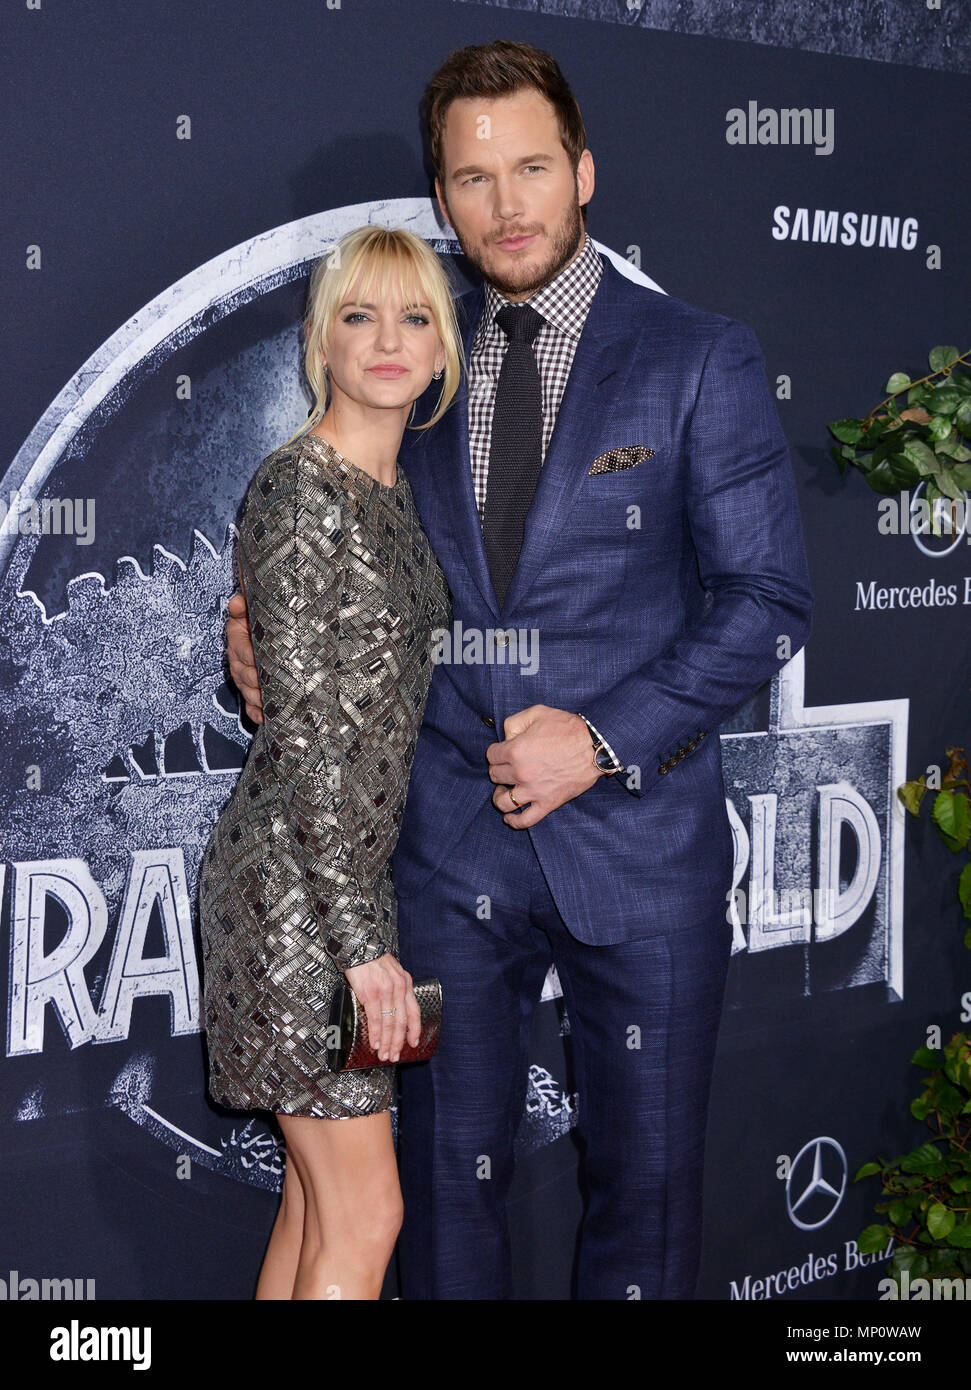 Anna Faris, Chris Pratt 060 at the Jurassic World Premiere at the Hollywood and Highland, Dolby Theatre in Los Angeles.. June, 9, 2015.a  Anna Faris, Chris Pratt 060 ------------- Red Carpet Event, Vertical, USA, Film Industry, Celebrities,  Photography, Bestof, Arts Culture and Entertainment, Topix Celebrities fashion /  Vertical, Best of, Event in Hollywood Life - California,  Red Carpet and backstage, USA, Film Industry, Celebrities,  movie celebrities, TV celebrities, Music celebrities, Photography, Bestof, Arts Culture and Entertainment,  Topix, vertical,  family from from the year , 2015 Stock Photo